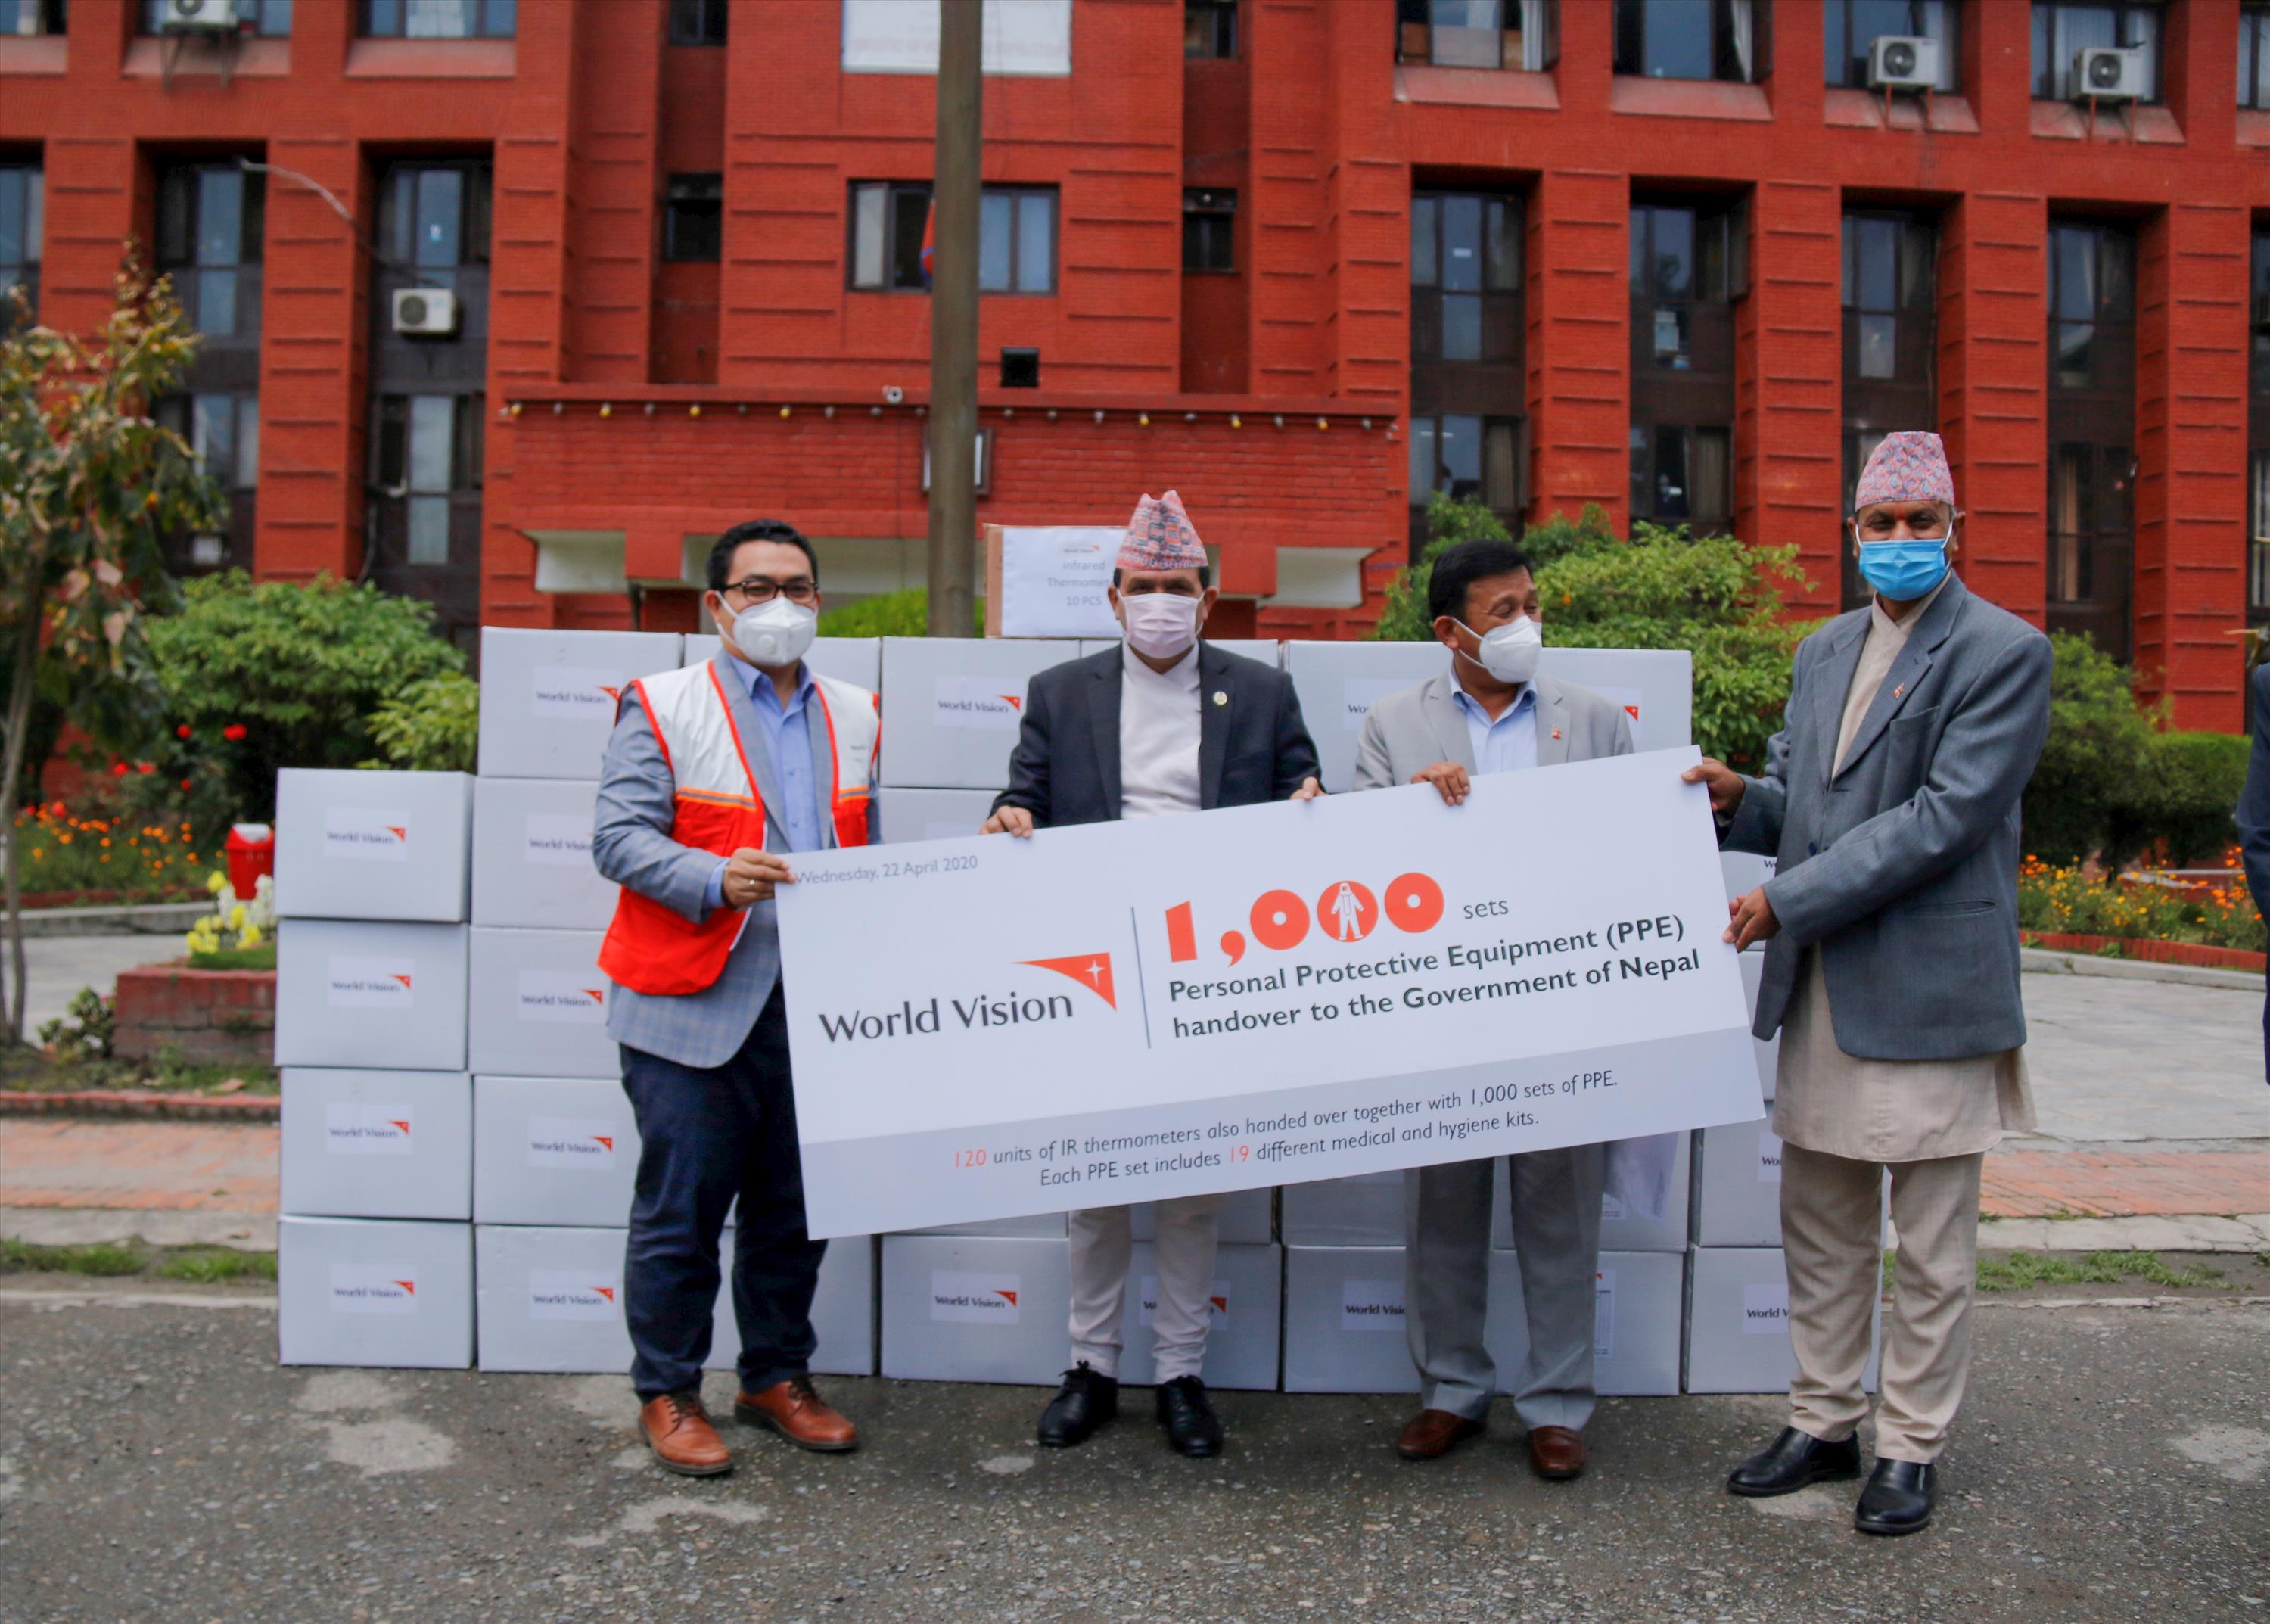 World Vision International Nepal supported 1,000 Personal Protective Equipment (PPE) and 120 IR thermometers to the Government of Nepal